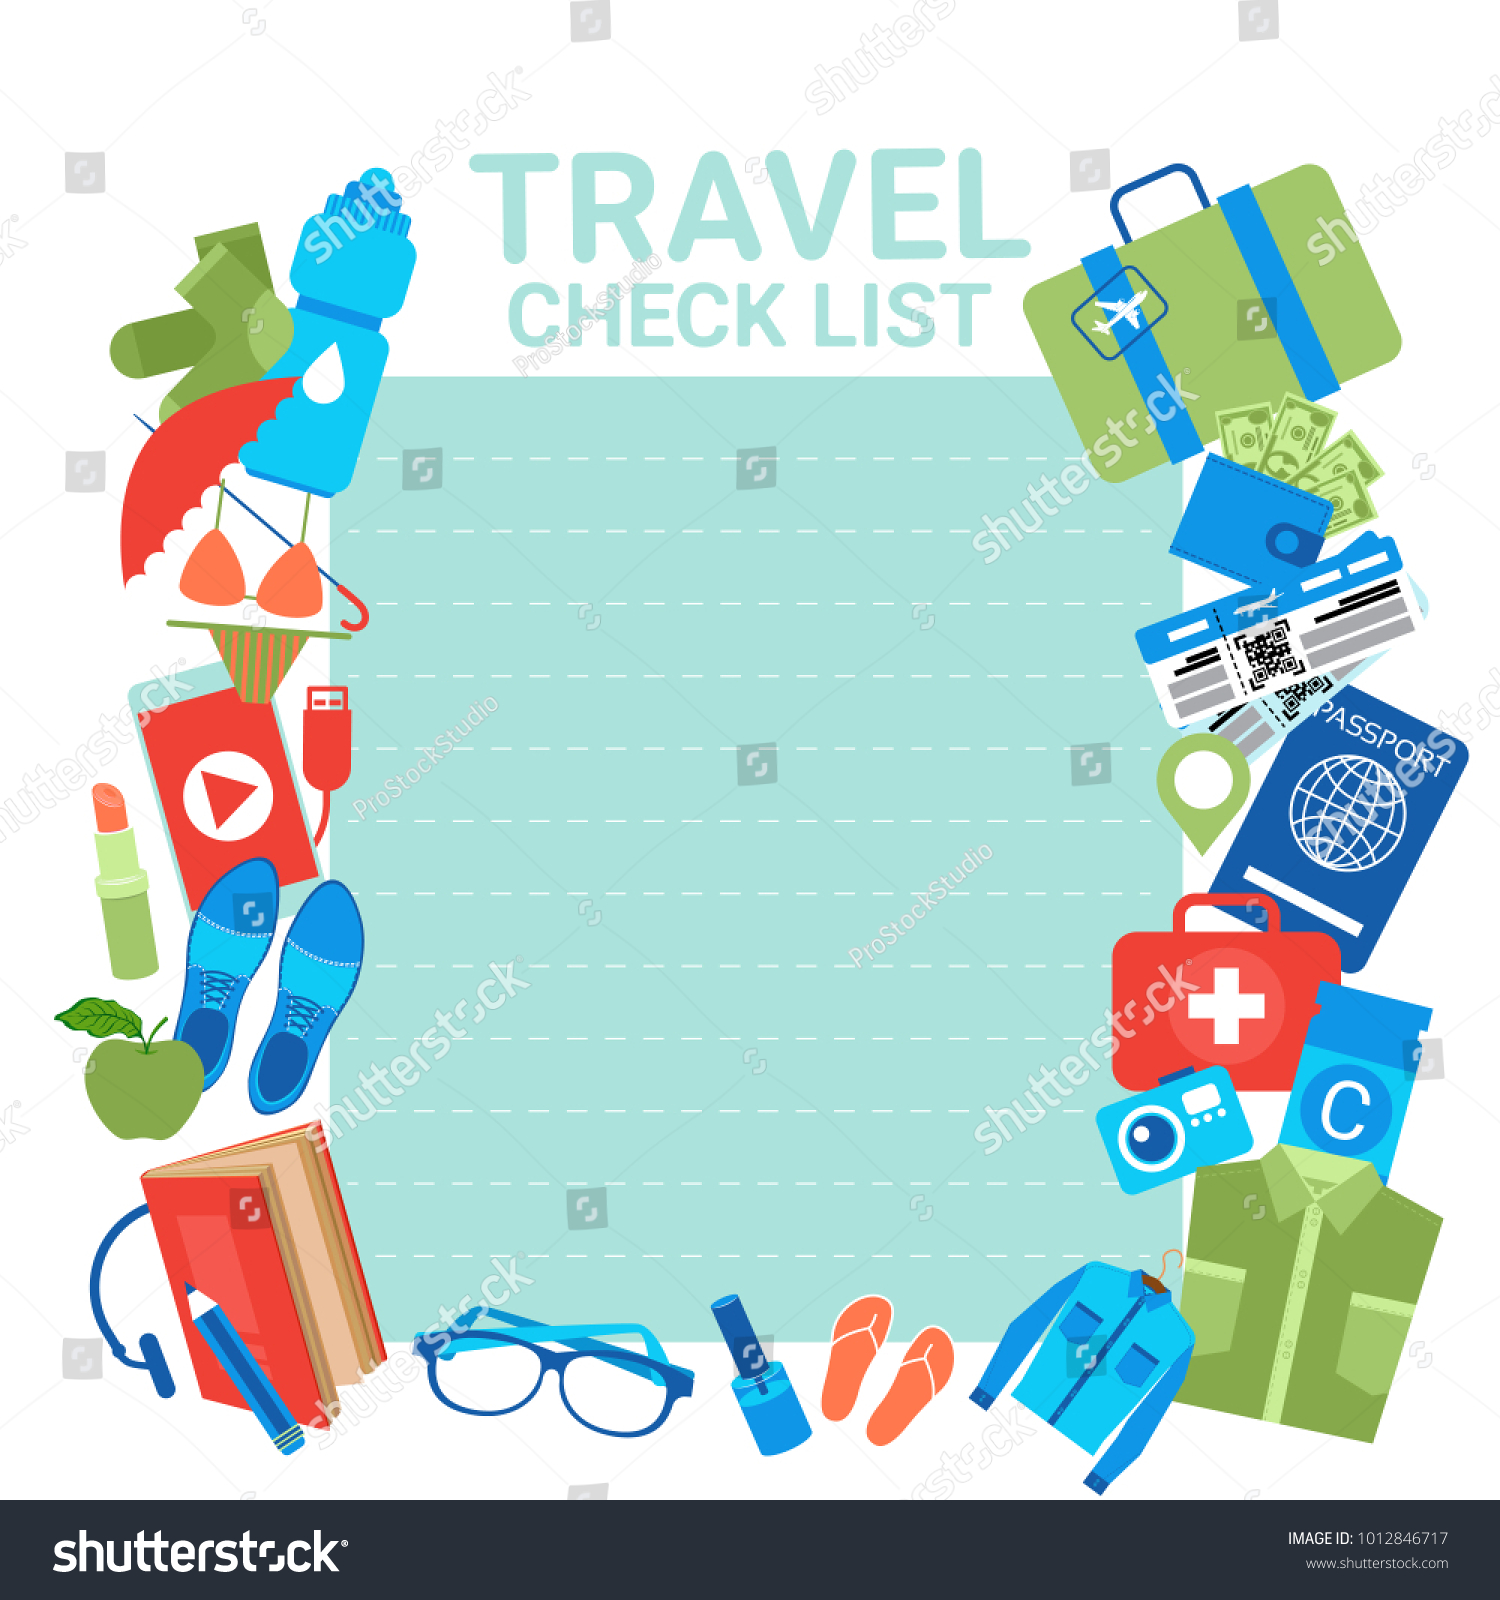 Check List Template from image.shutterstock.com